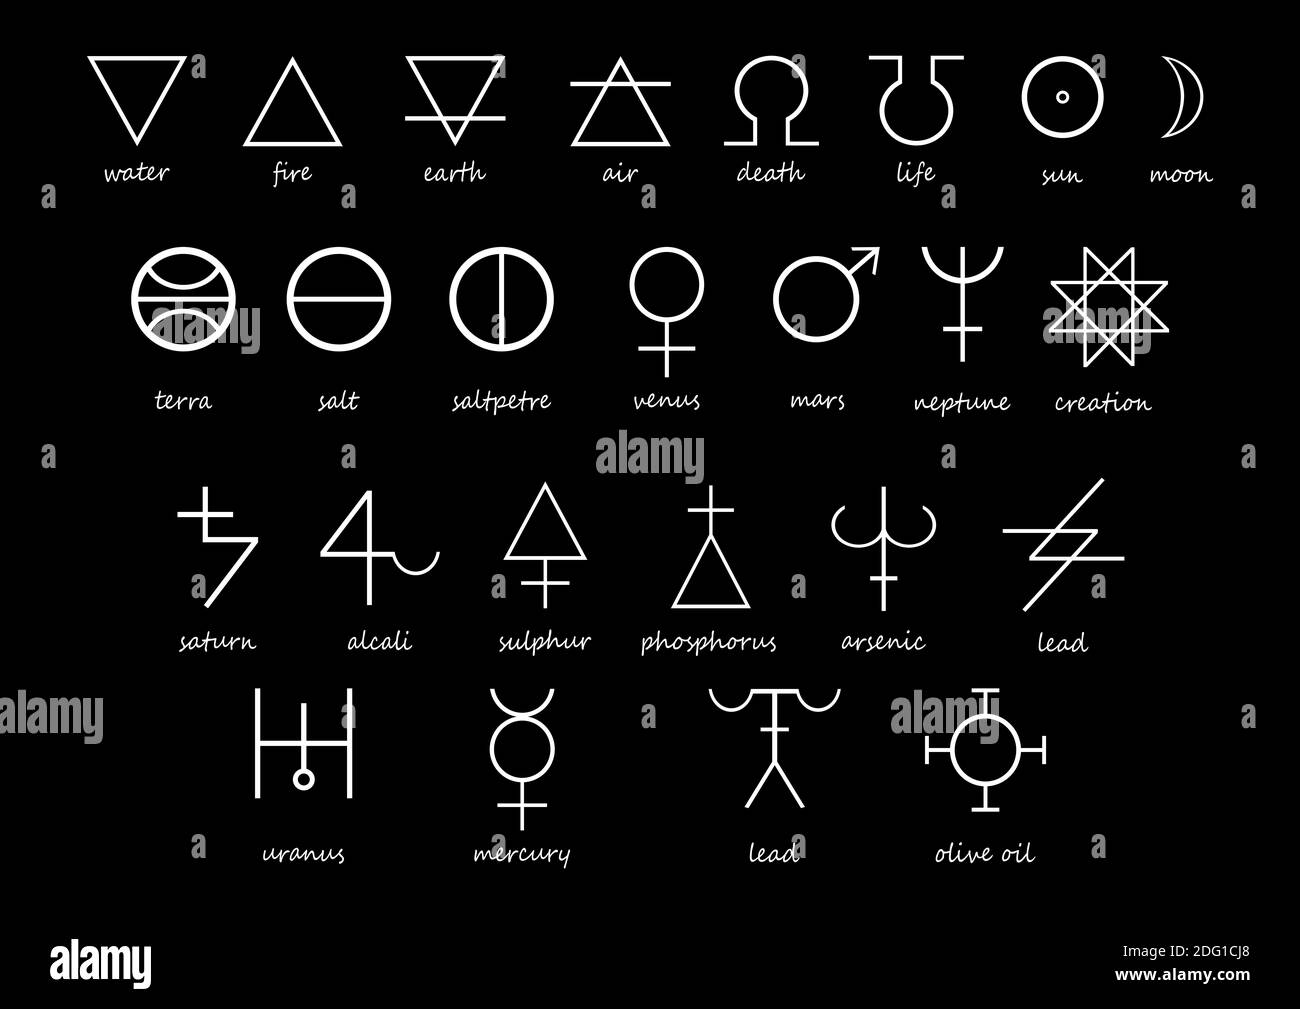 Alchemy symbols in white on black background. Black and white alchemy symbol set. Symbols of nature and creation. Stock Photo